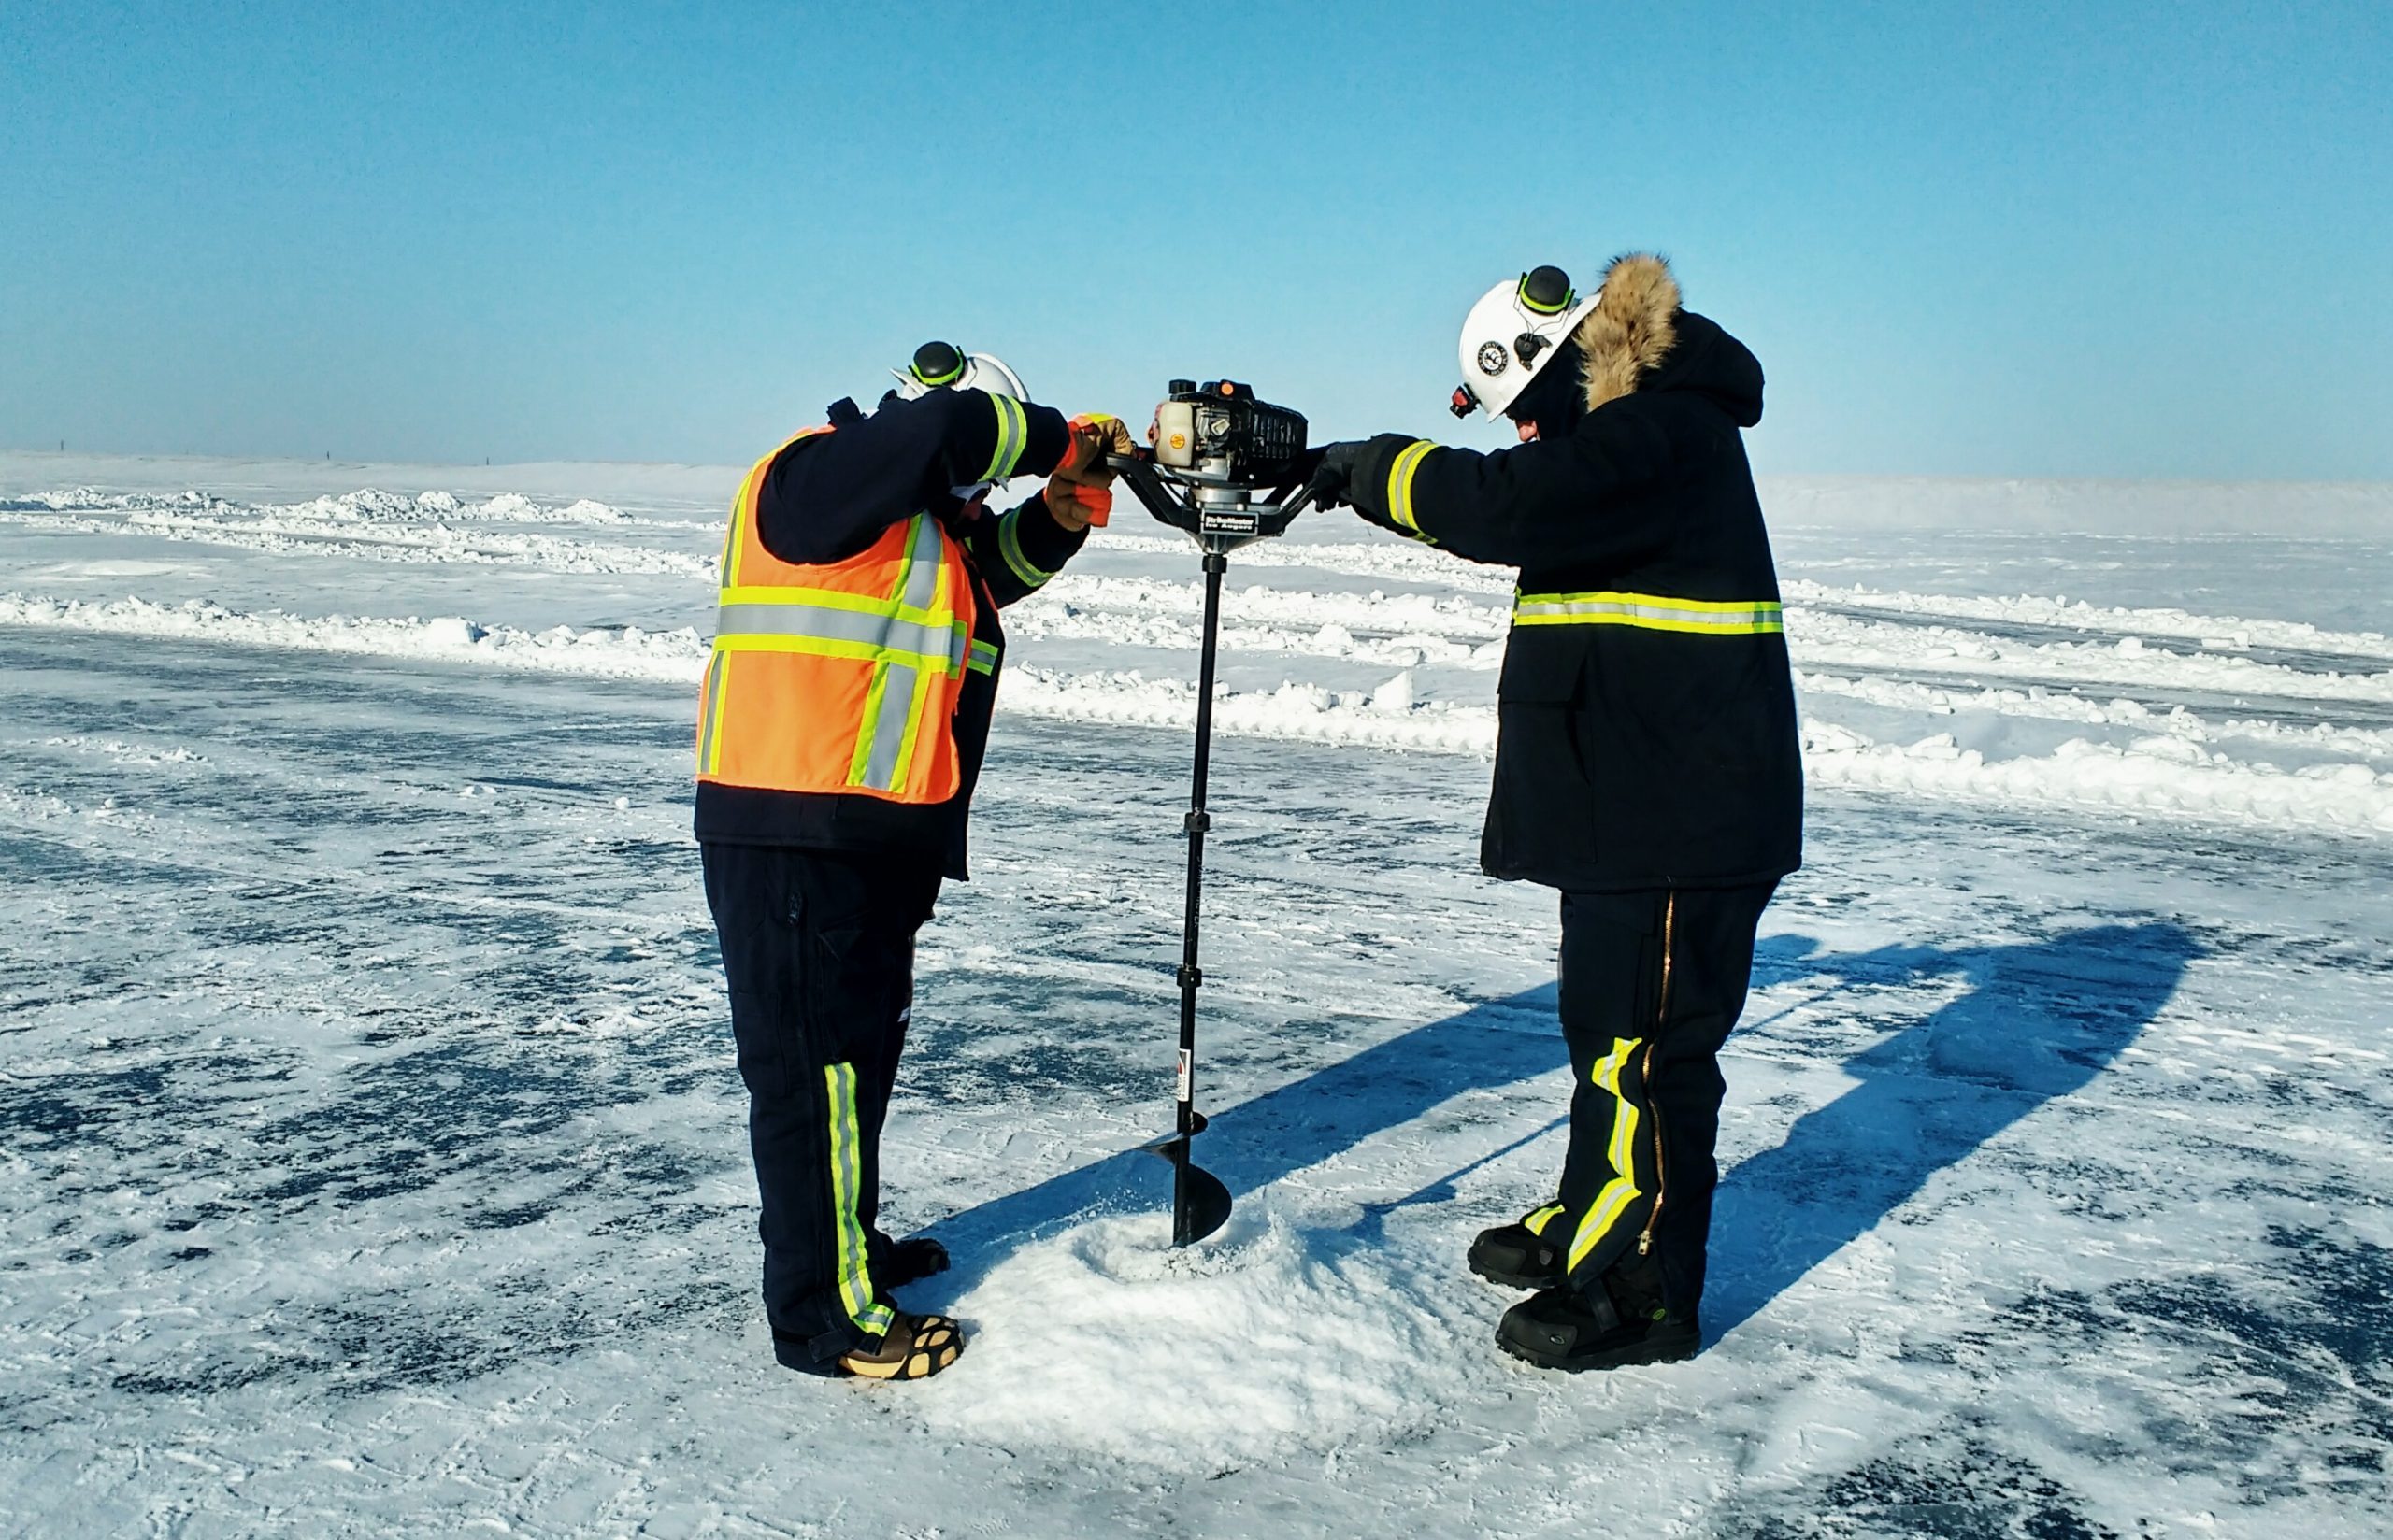 Practicing oil detection and delineation under-ice (Tactic T-3) on the sea ice using ice auger